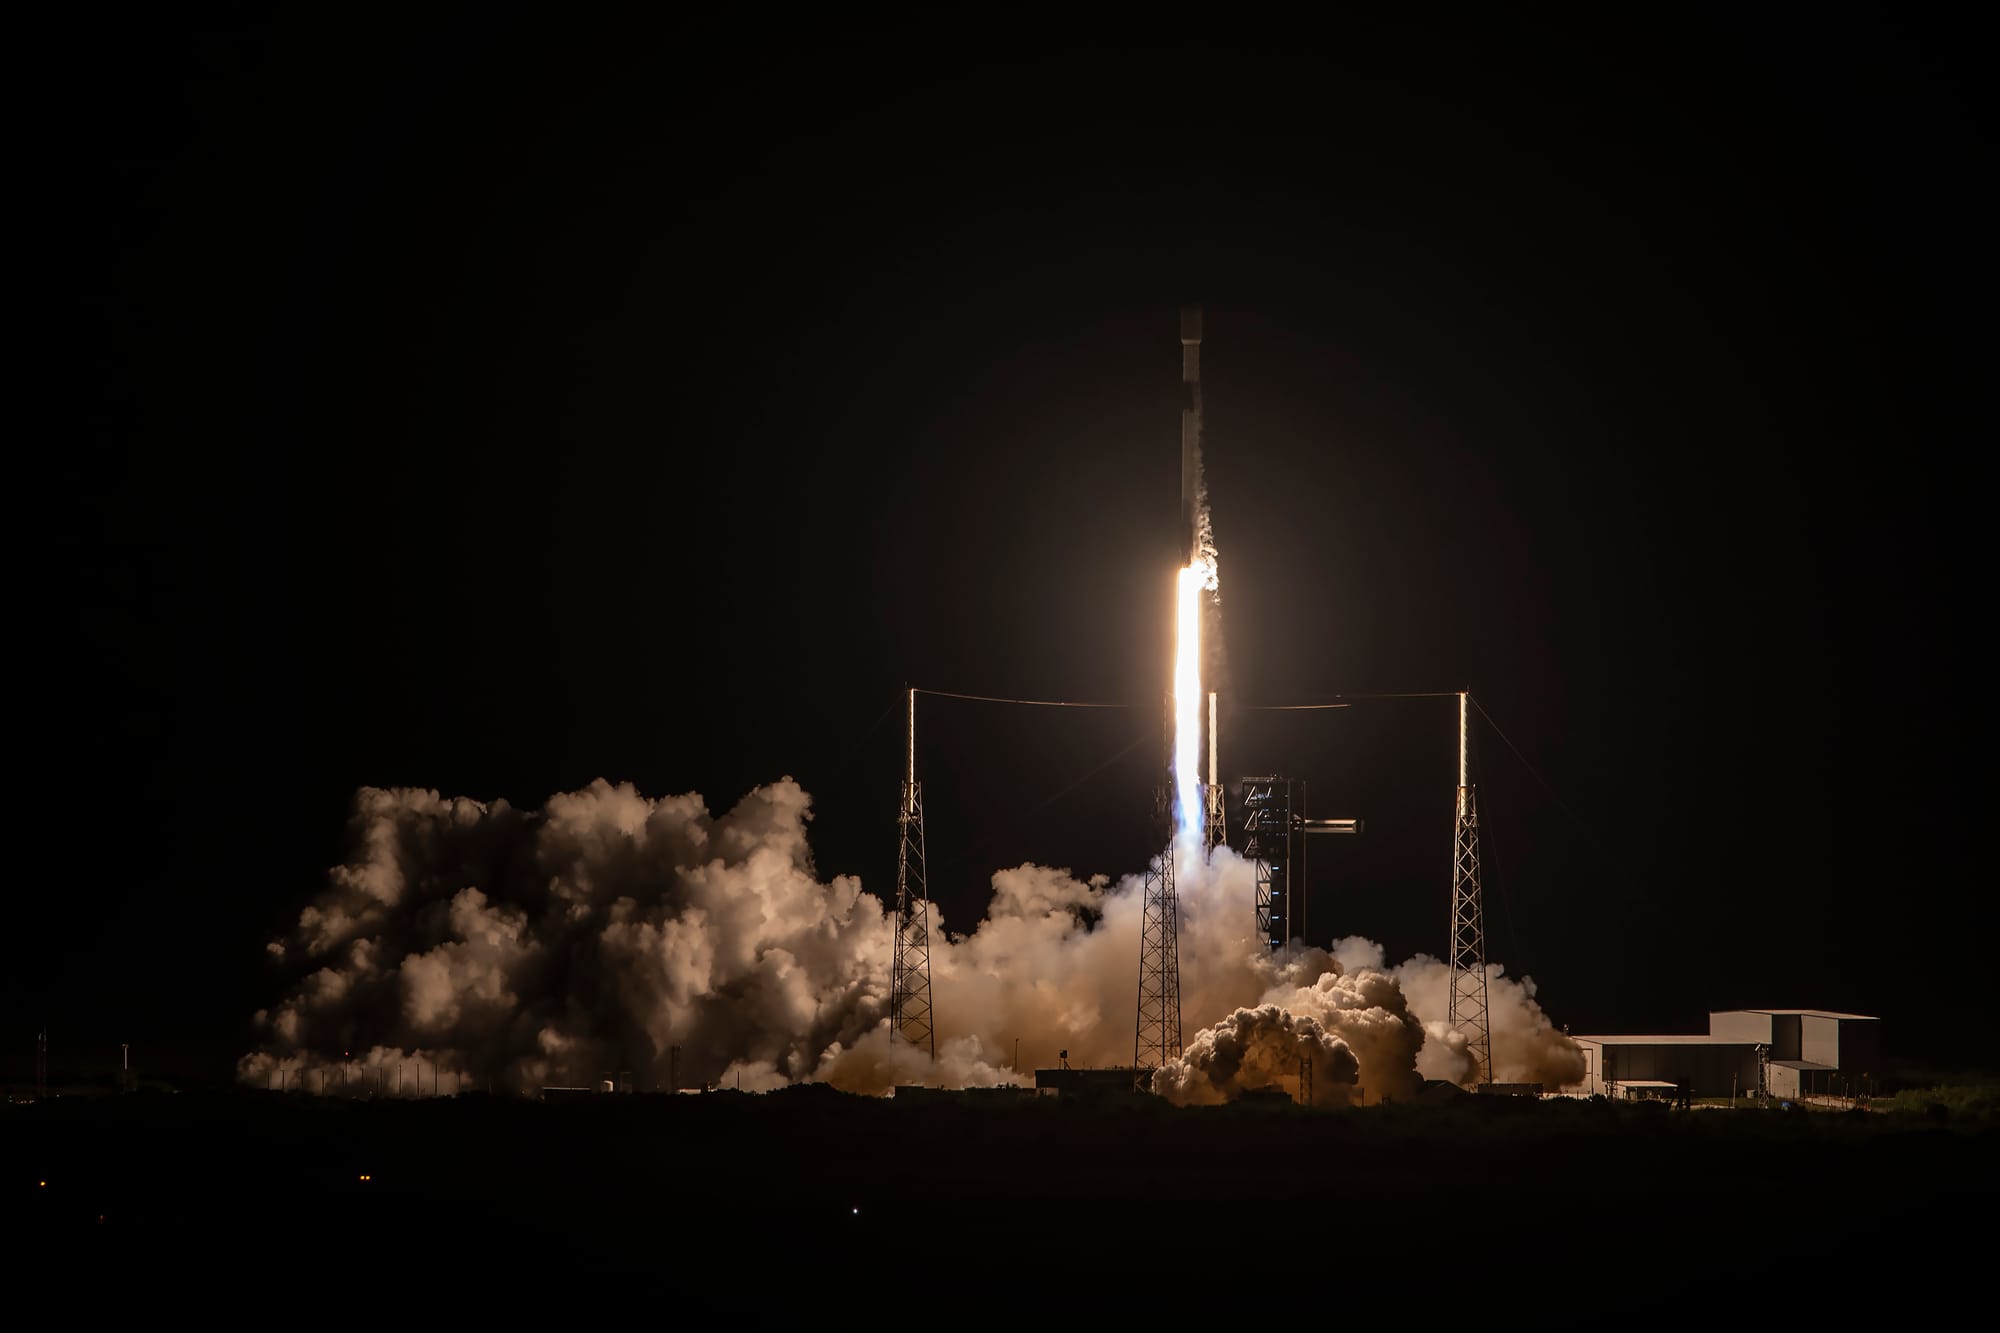 Falcon 9 lifting off from Space Launch Complex 40 for Starlink Group 6-62. ©SpaceX